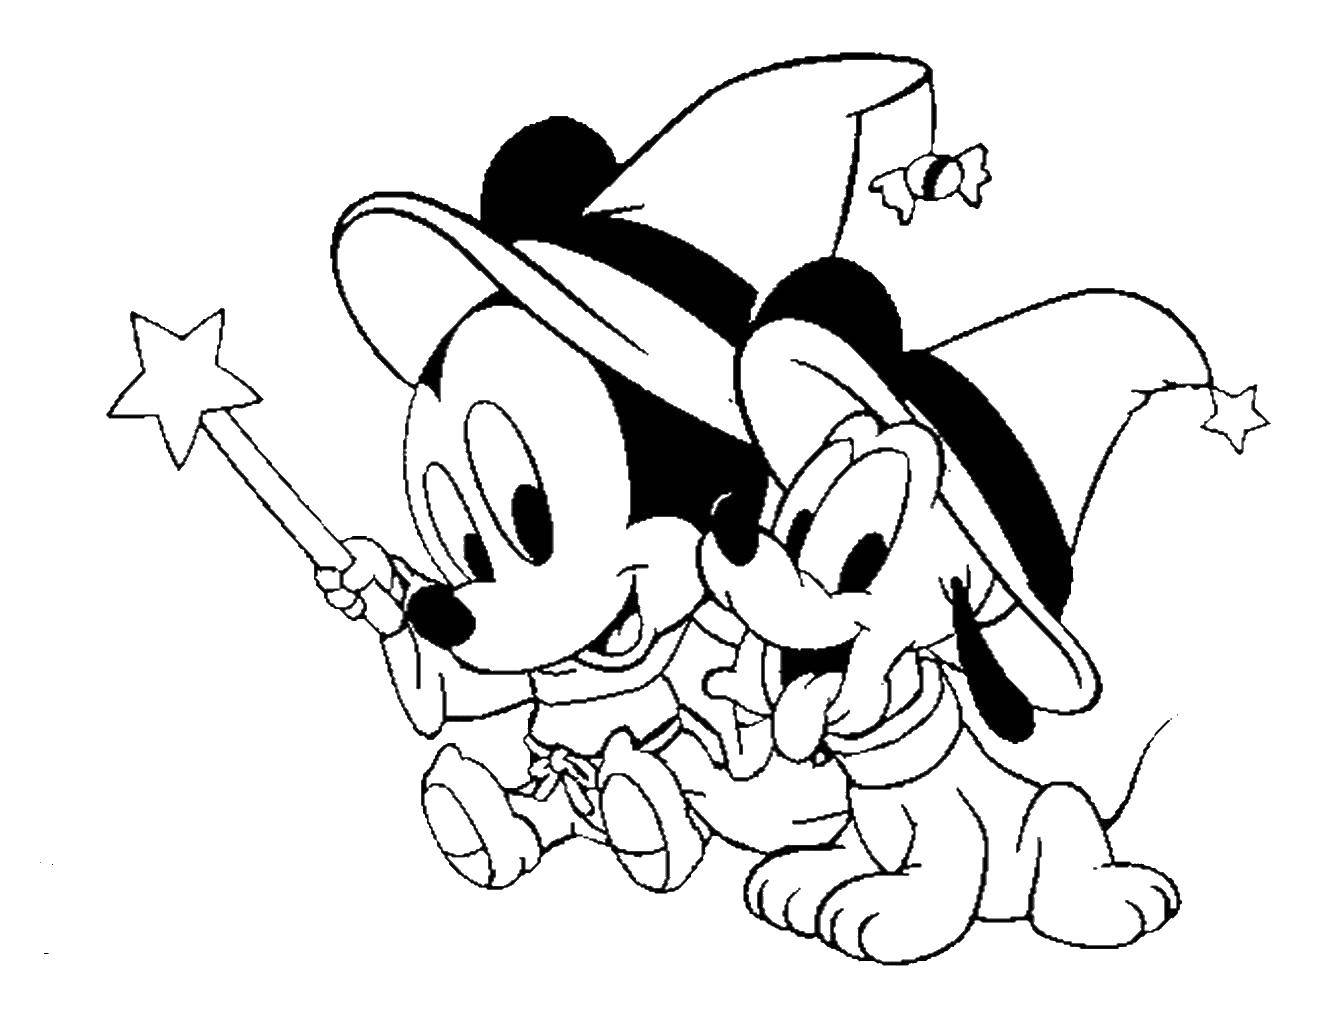 Coloring Little Mickey and Pluto. Category Disney coloring pages. Tags:  Disney, Mickey Mouse, Pluto.